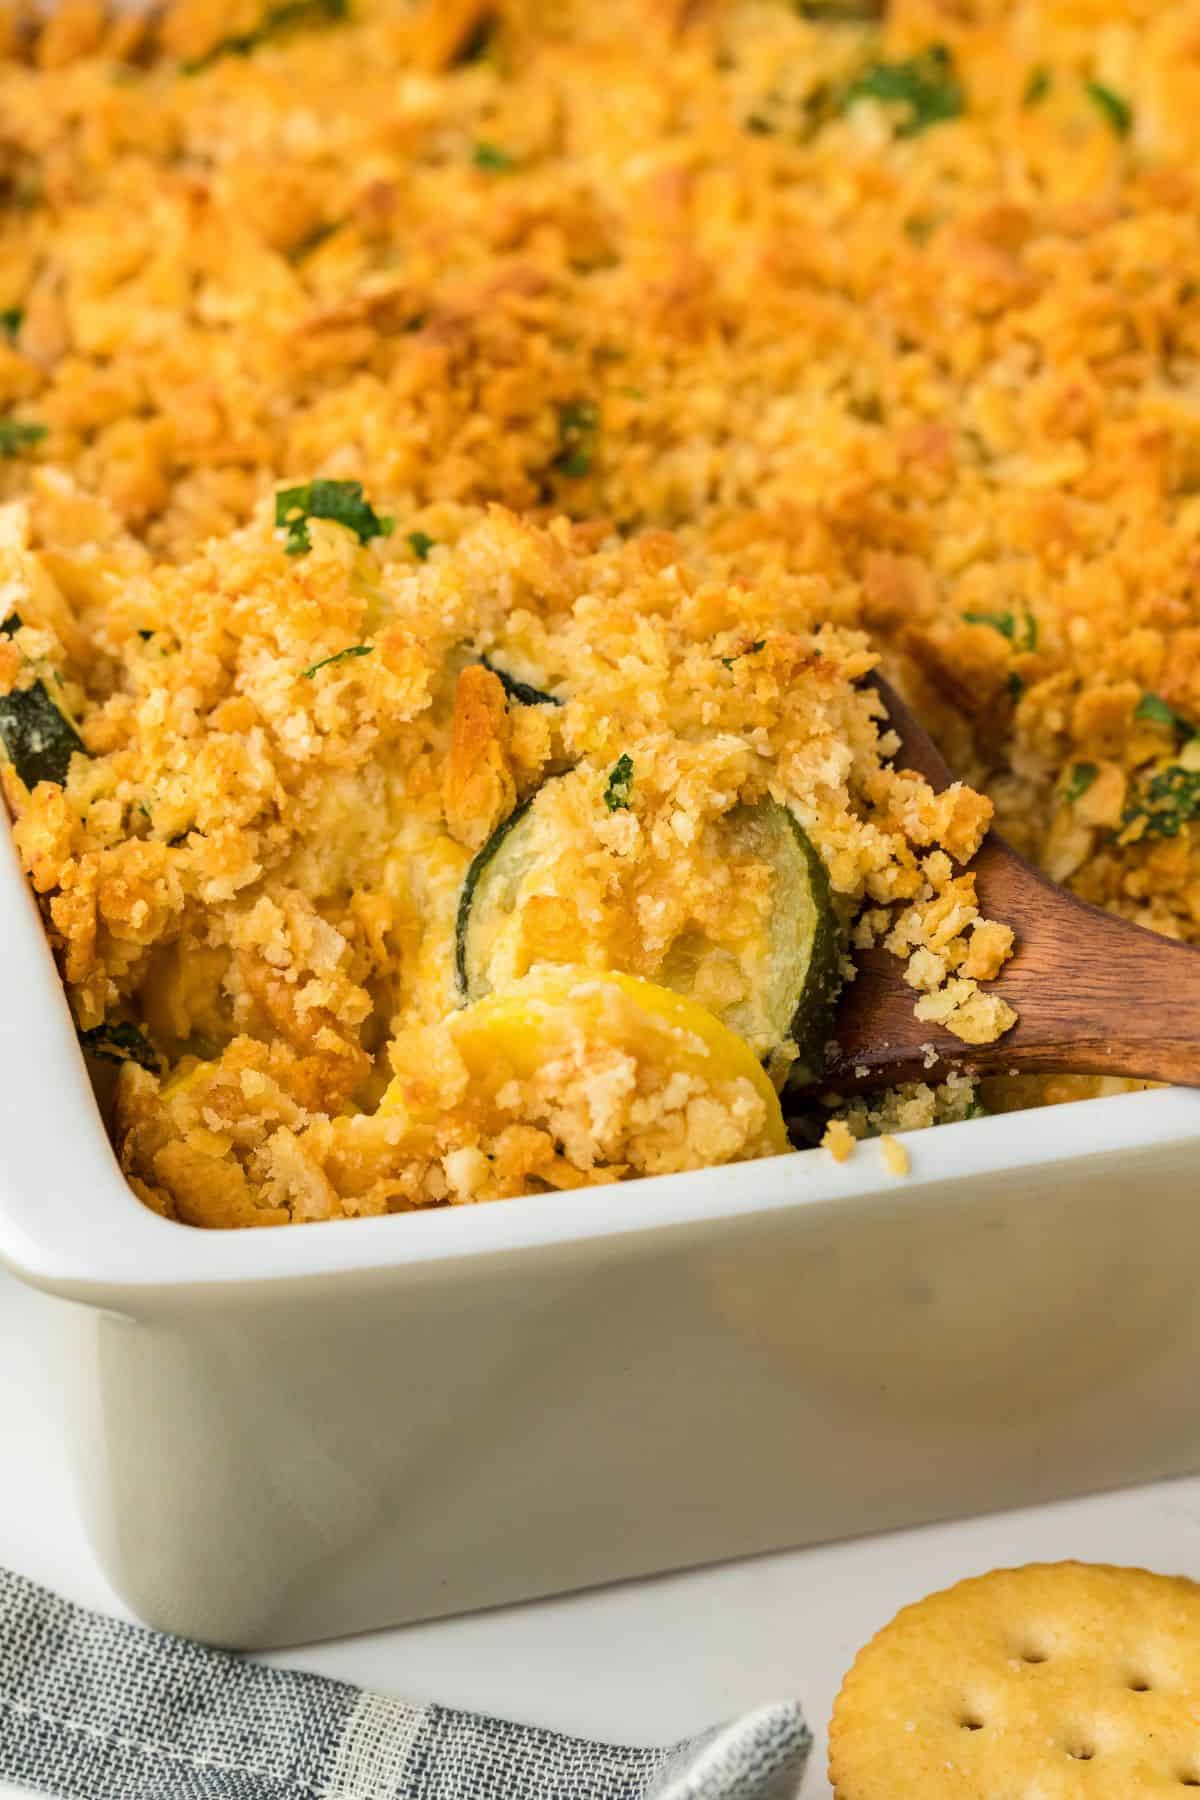 Close up of a baked squash casserole in a white dish, topped with a crispy, golden-brown crust. A wooden spoon is scooping a portion, revealing the creamy interior filled with slices of yellow squash